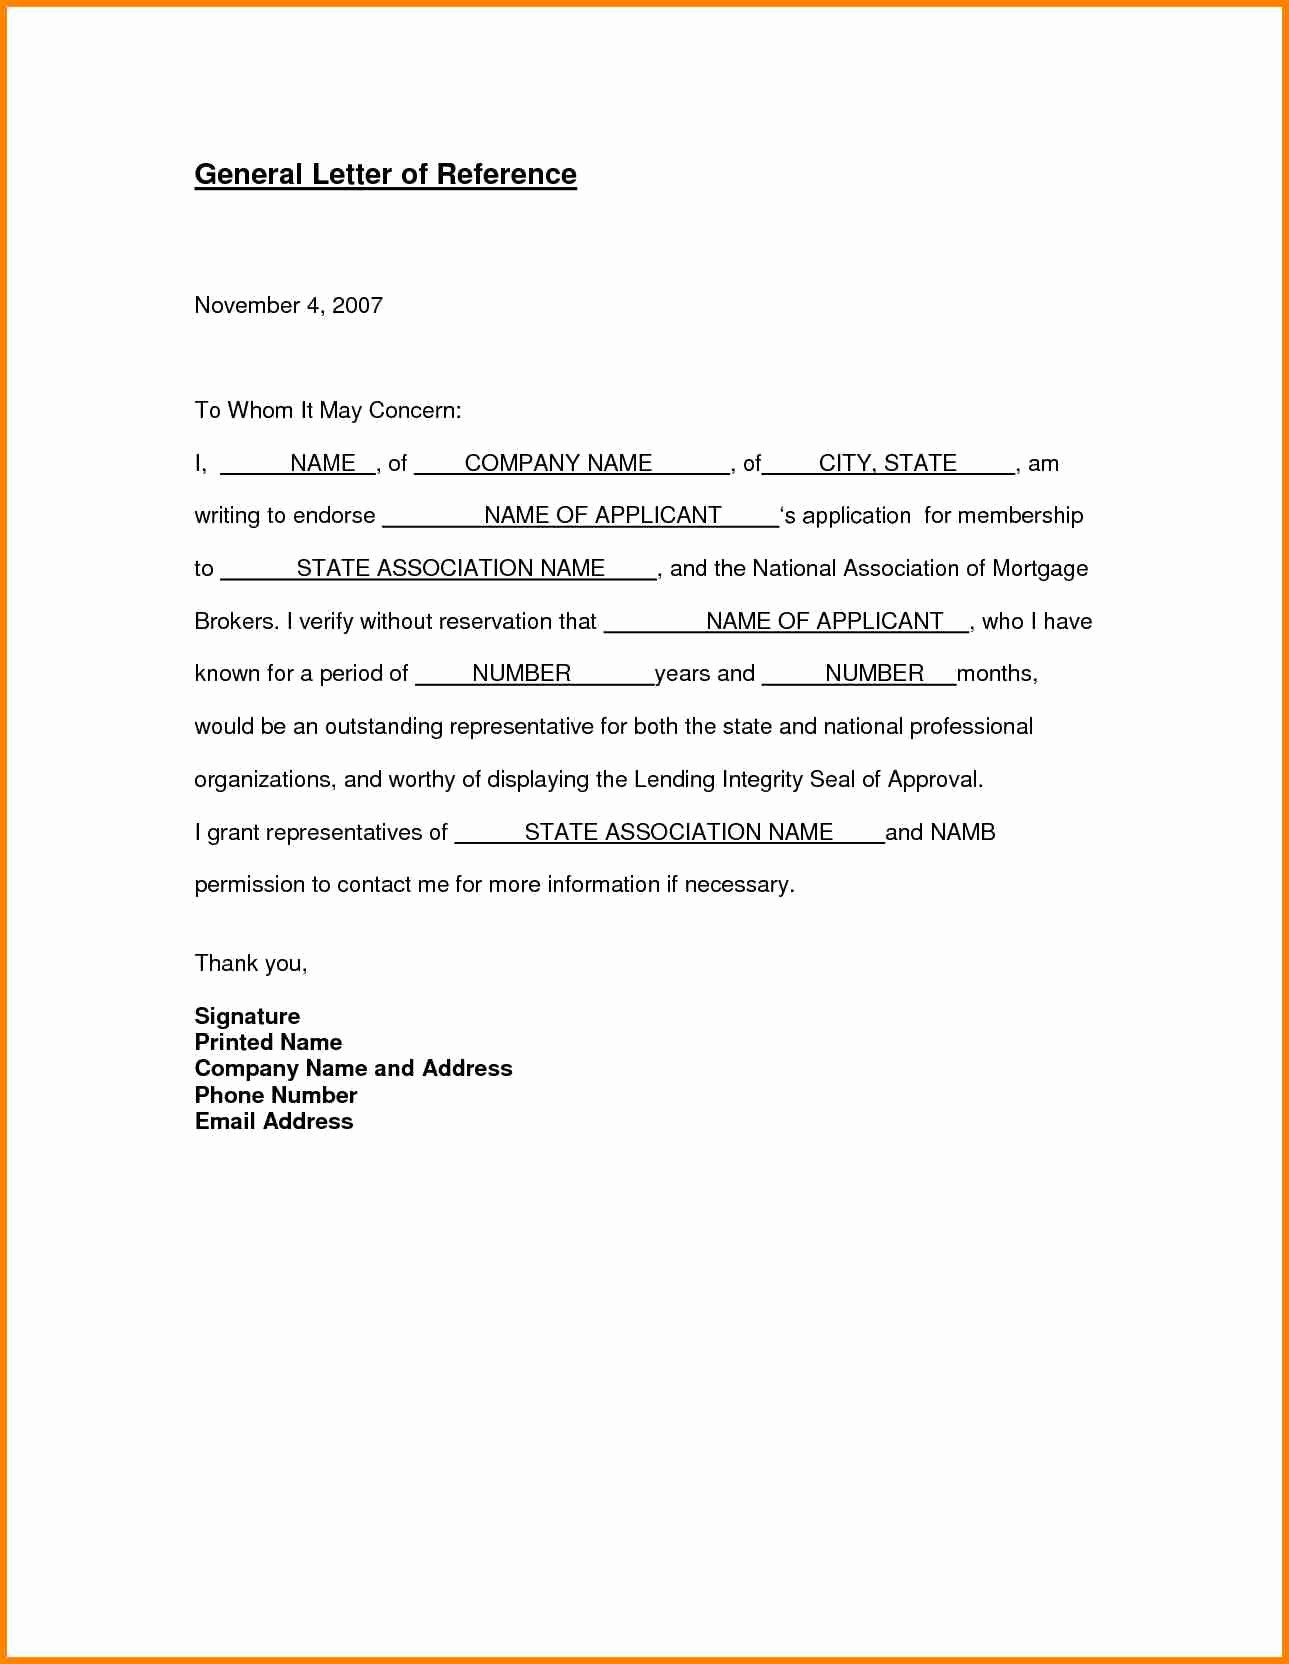 Formats for Letters Of Recommendation Luxury 5 General Letter Of Reference format